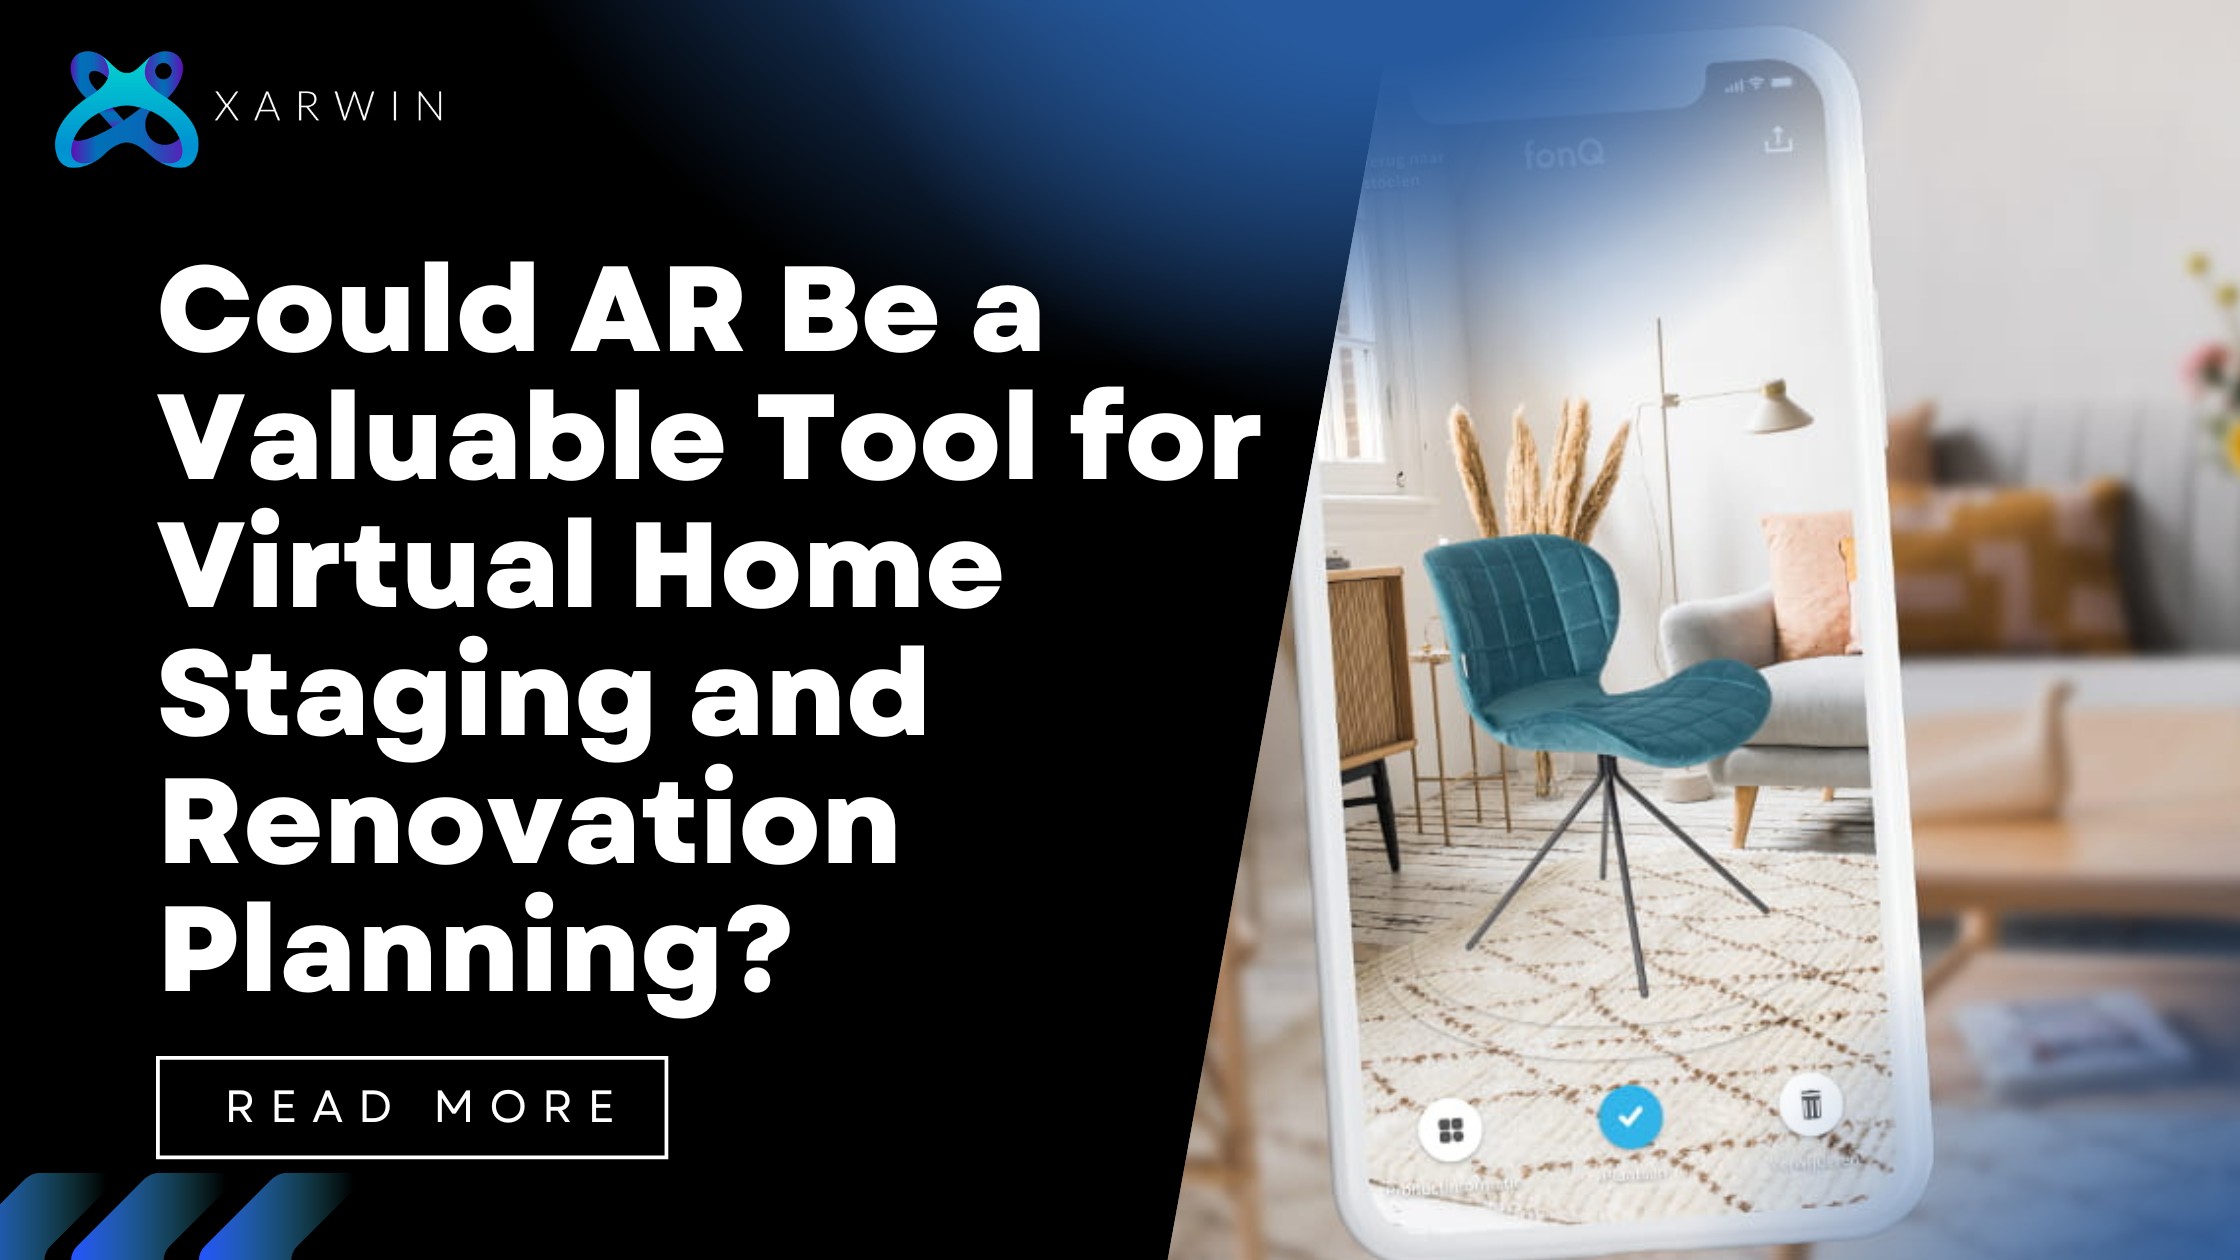 Could AR Be a Valuable Tool for Virtual Home Staging and Renovation Planning